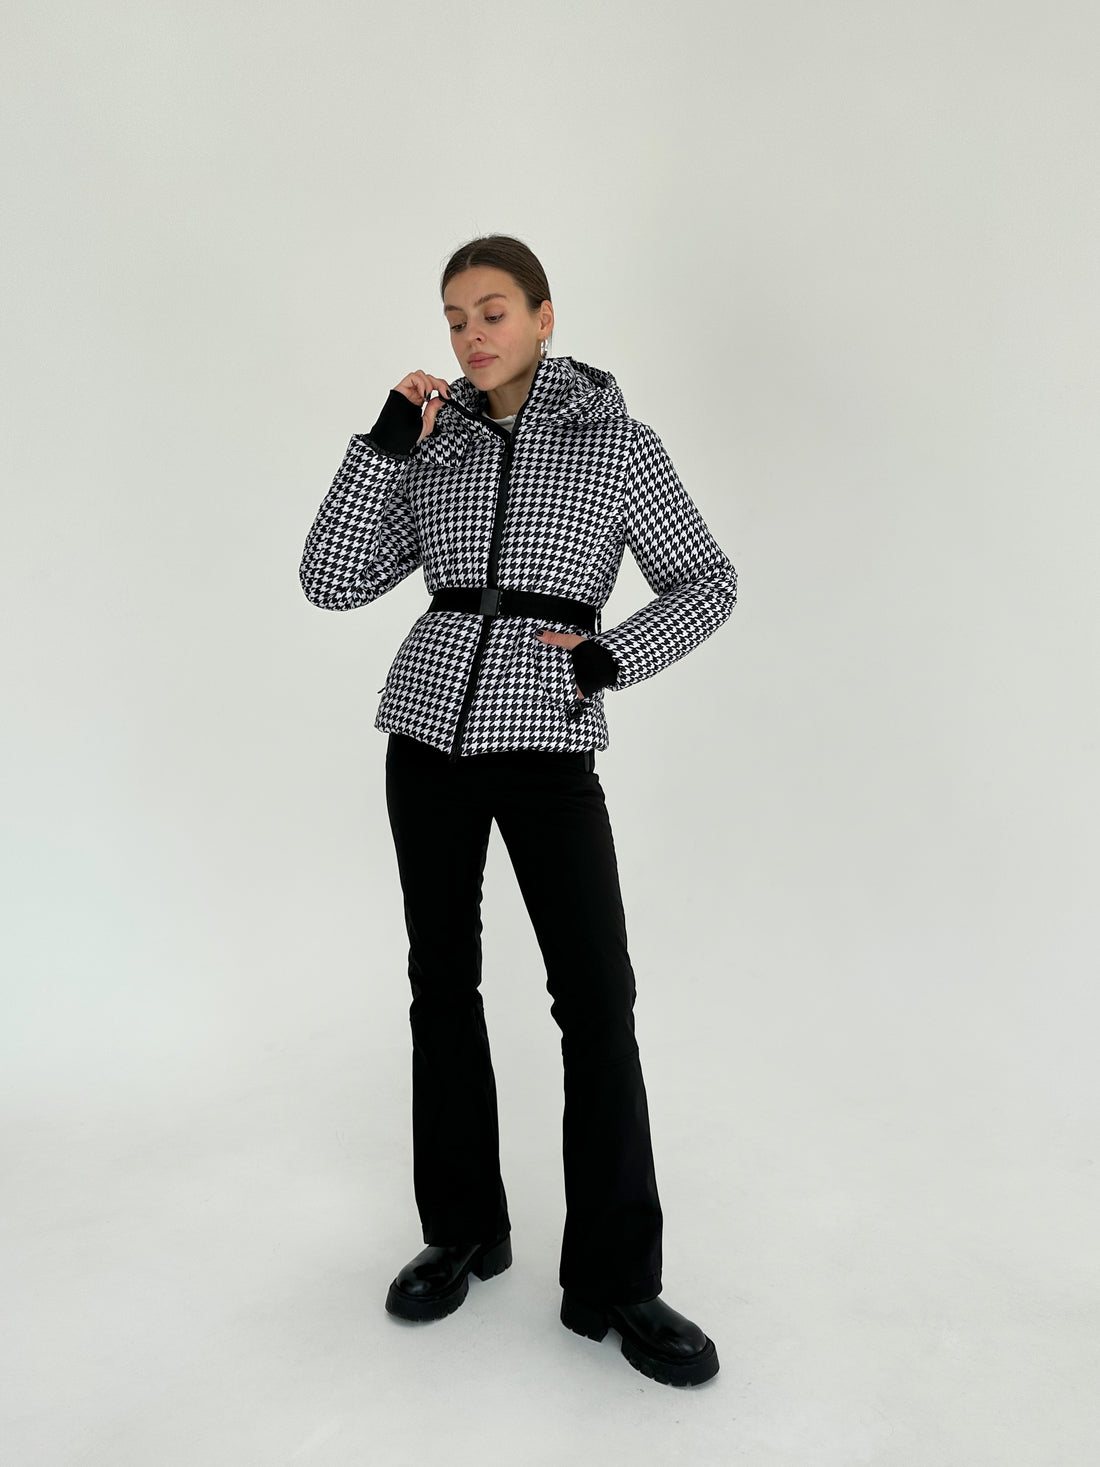 Houndstooth pattern two piece ski outfit - McKinley Houndstooth - Black ski suit